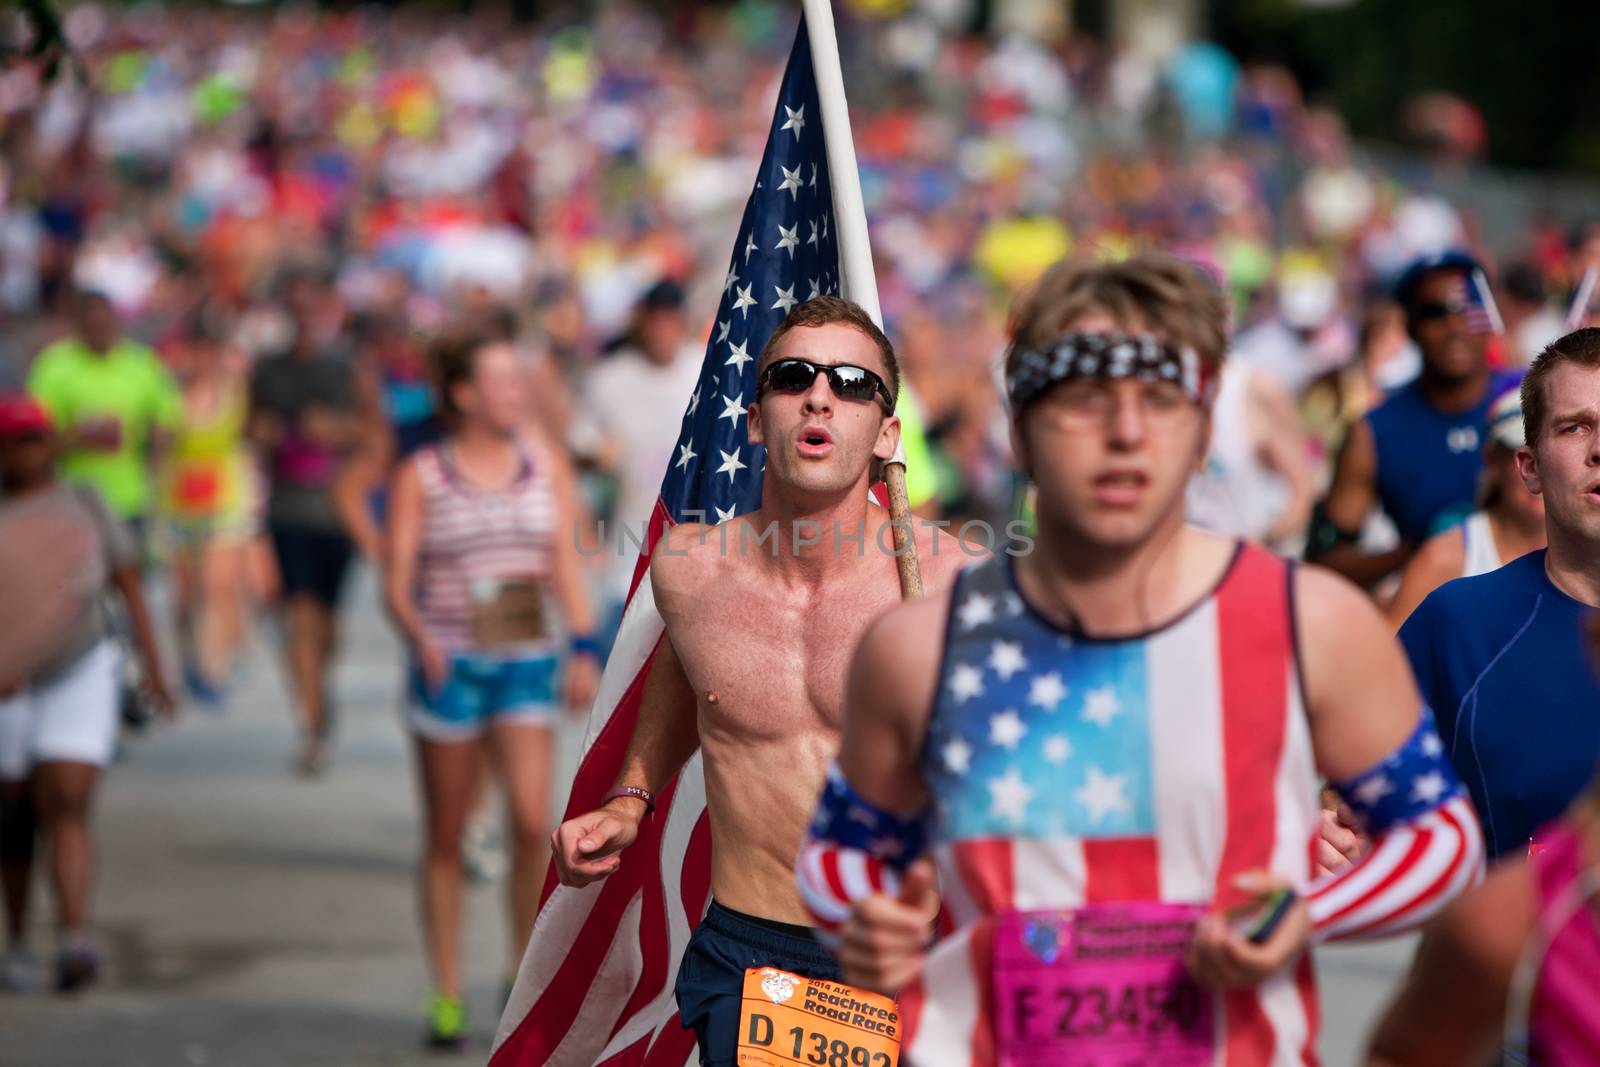 Atlanta, GA, USA - July 4, 2014:  A young man carries a large American flag on his shoulder as he runs among thousands of other people nearing the finish line of the Peachtree Road Race.